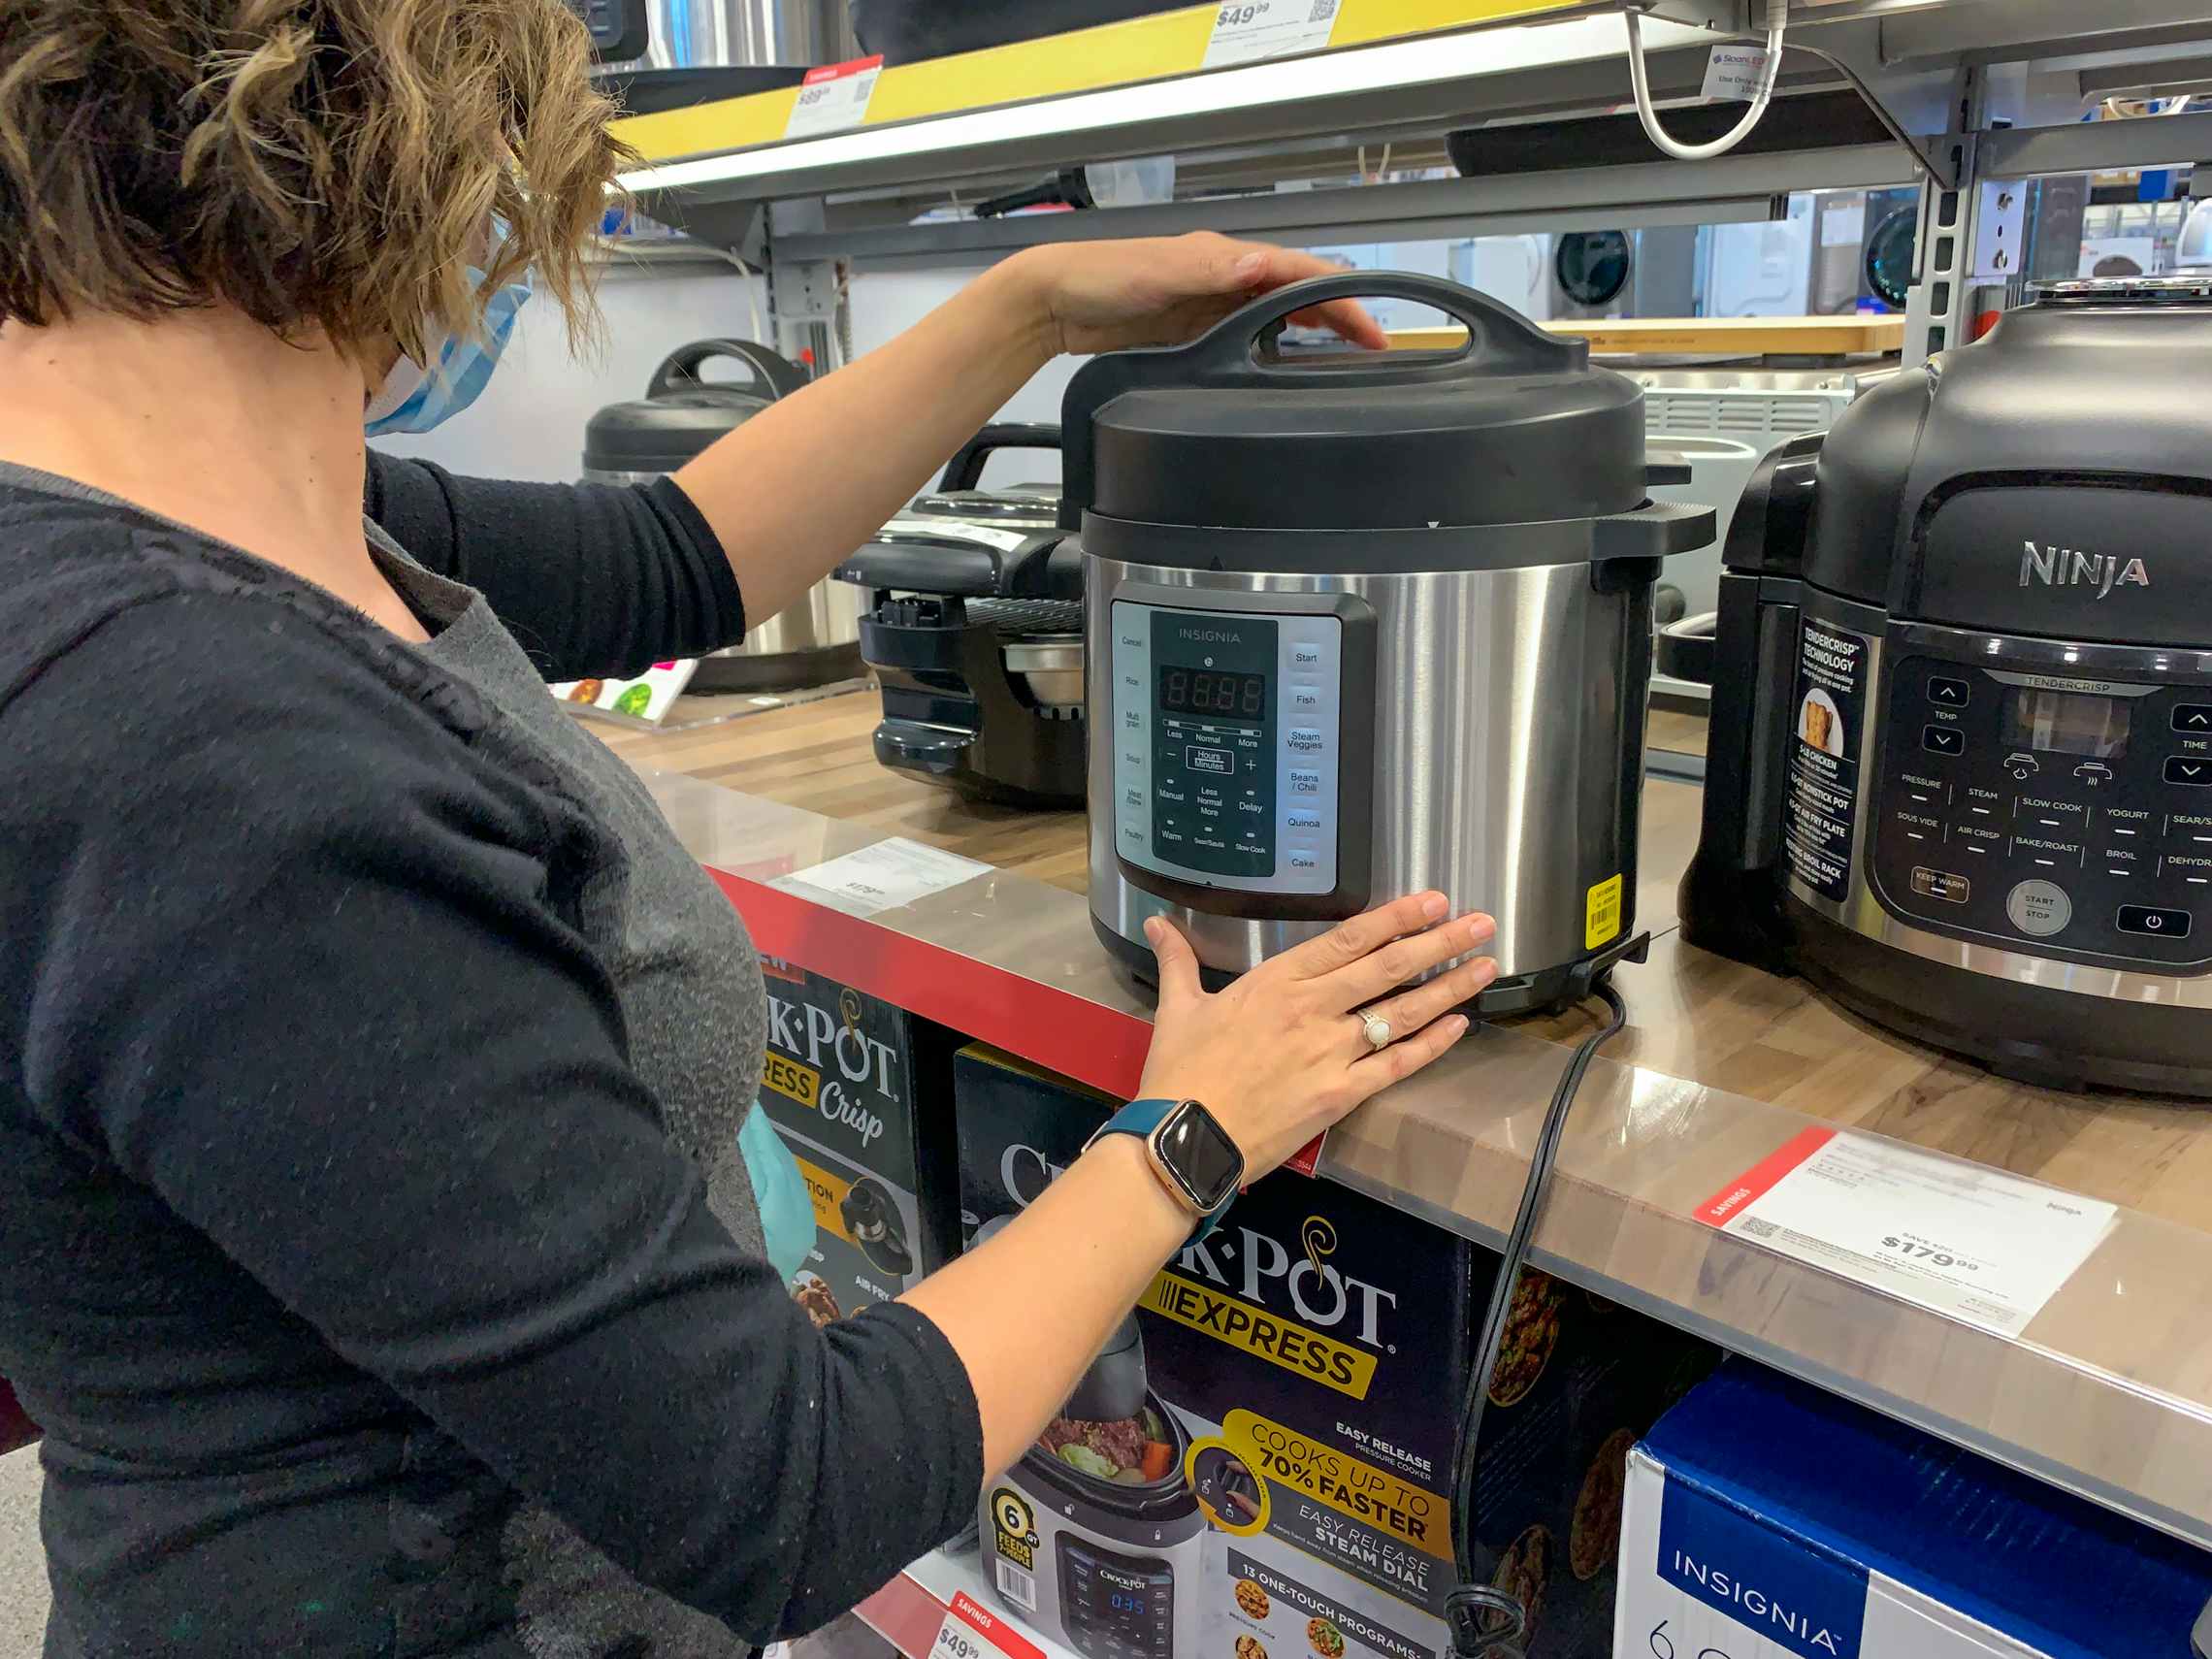 Extra 15% off Select Small Appliances at Target! Instant Pot 6qt 9